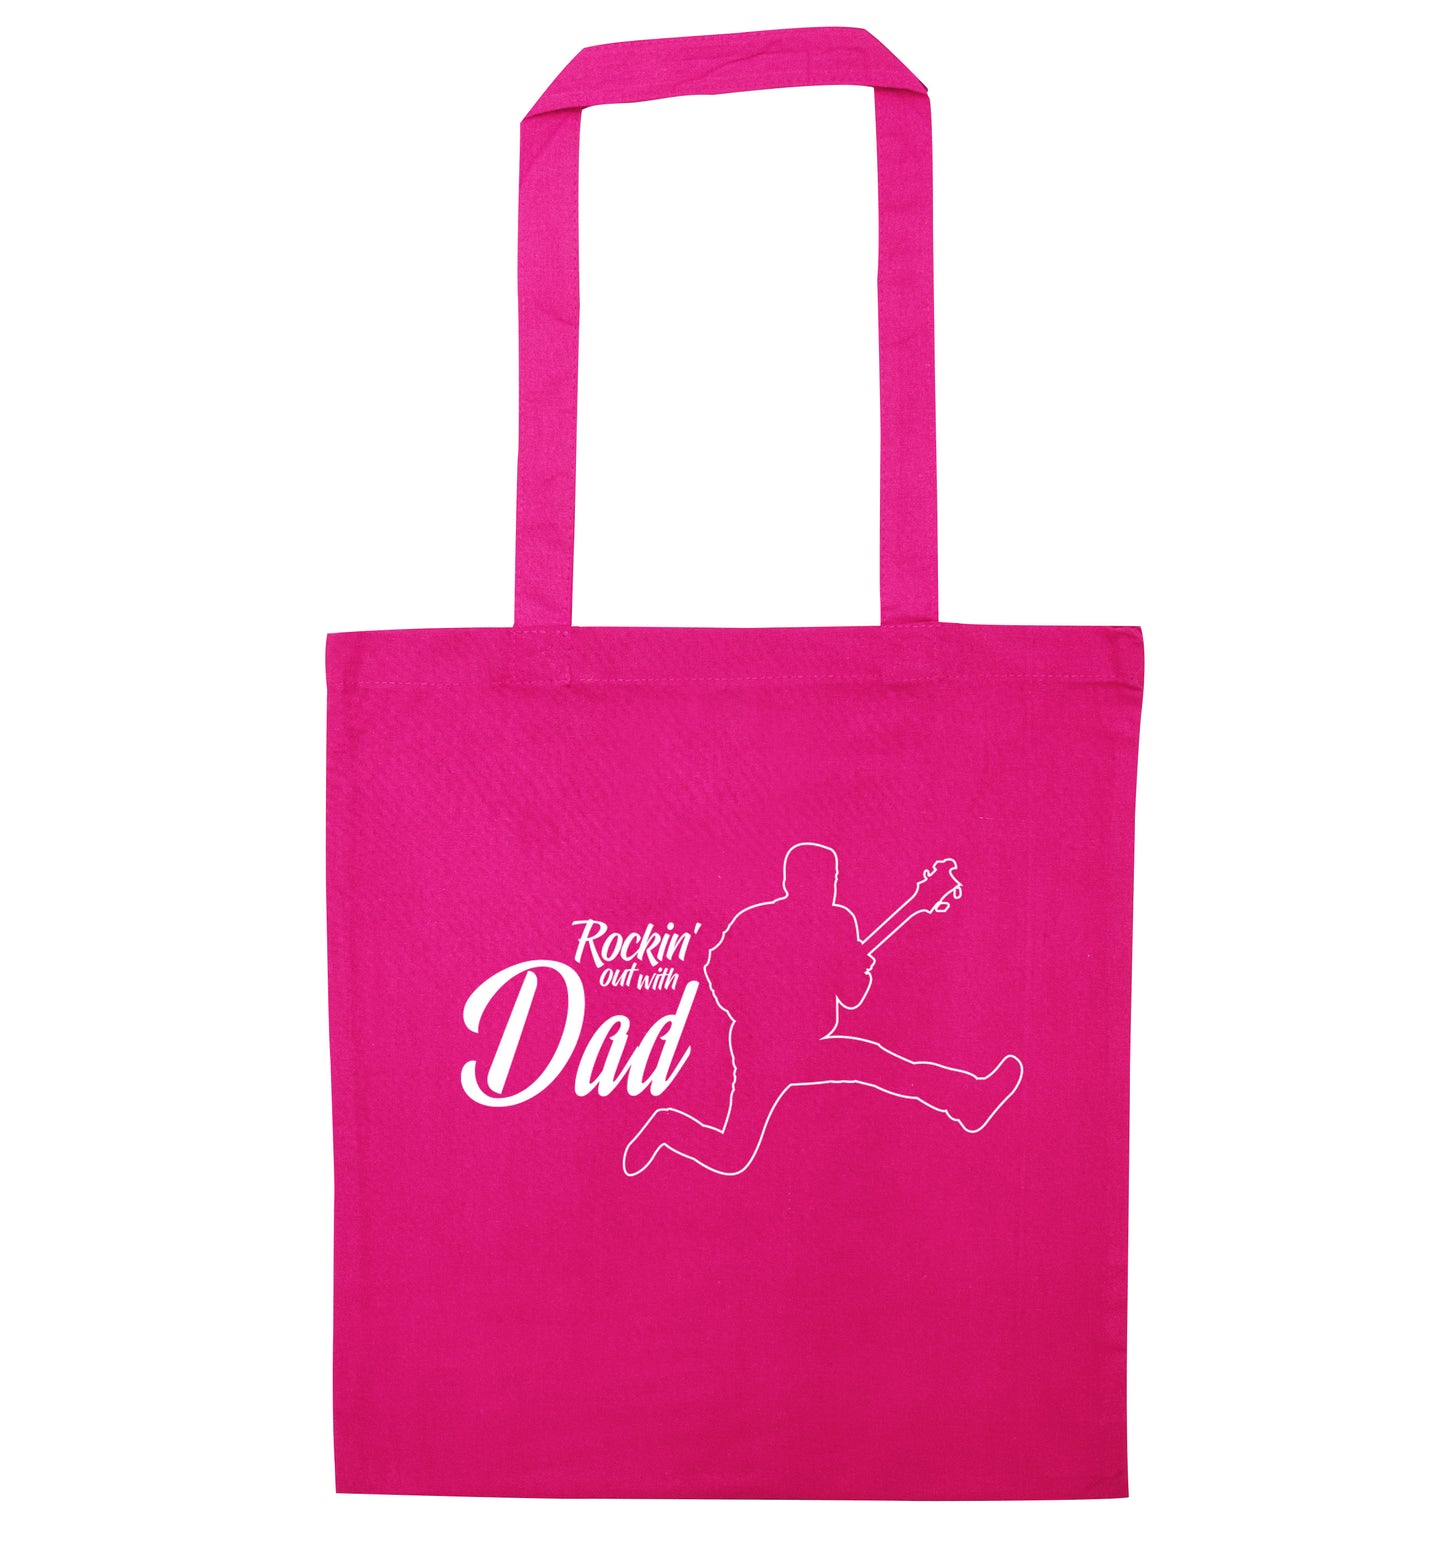 Rockin out with dad pink tote bag